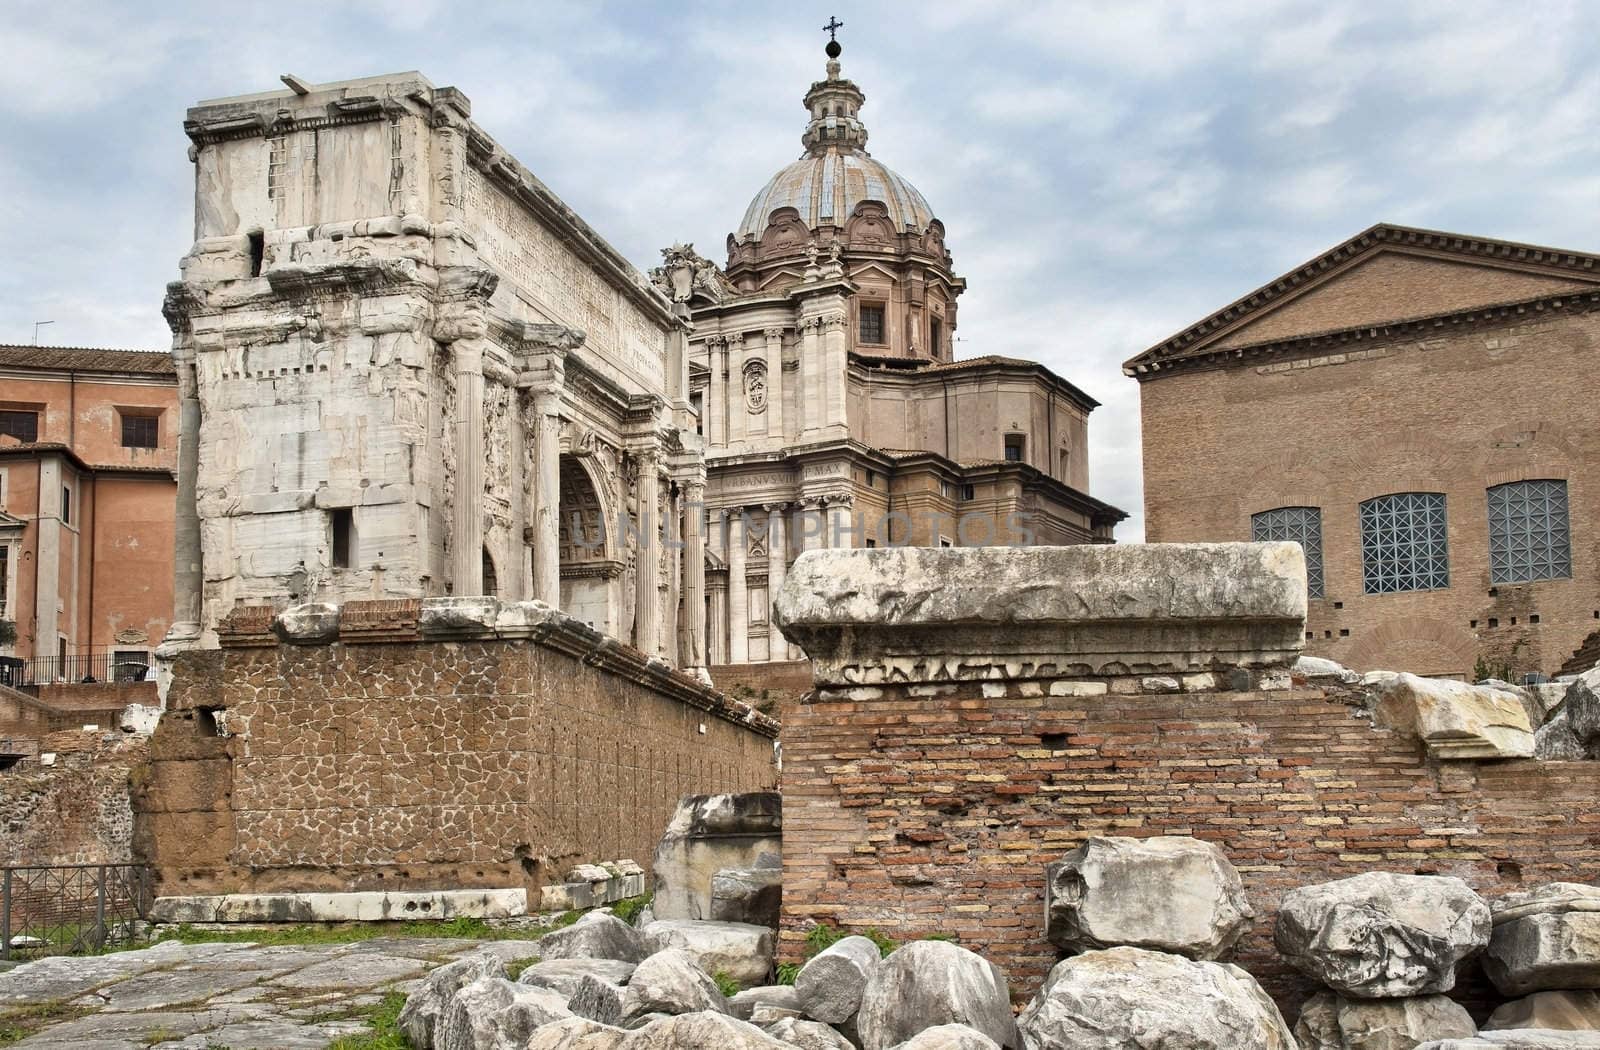 ruins of the Roman Forum, a triumphal arch and the Catholic church against cloudy sky